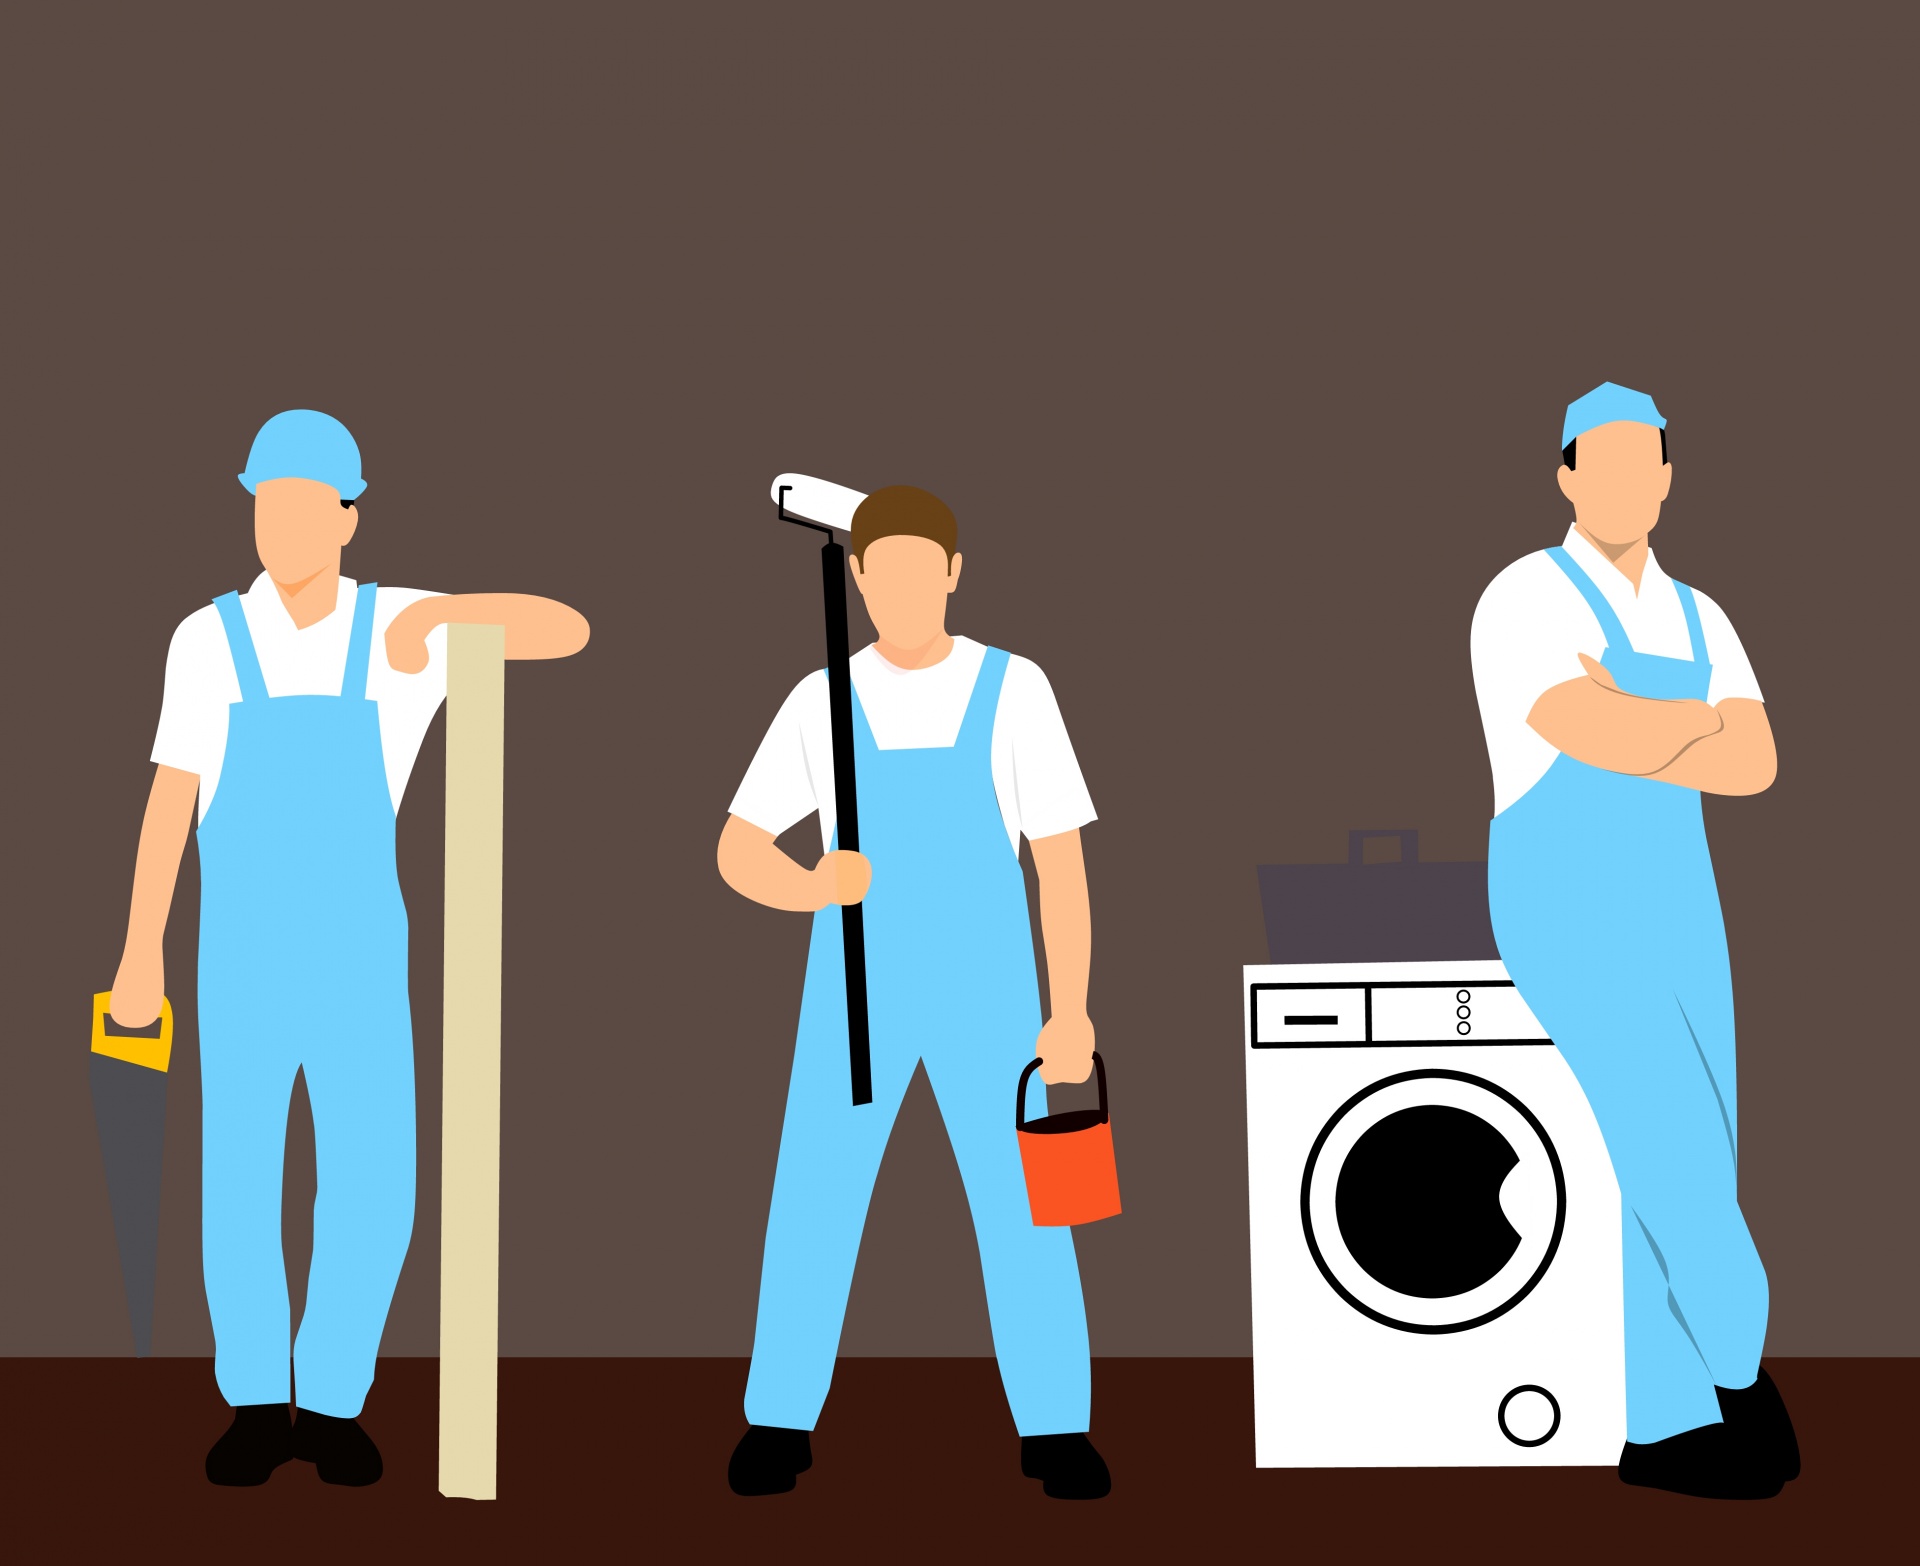 carpentry, painter, plumber, teamwork, fixing, instructor man, people, teamwork, business, squad, service, industry, cooperation, person, boss, partnership, young,you construction worker, construction industry, carpenter, occupation, young adult, con